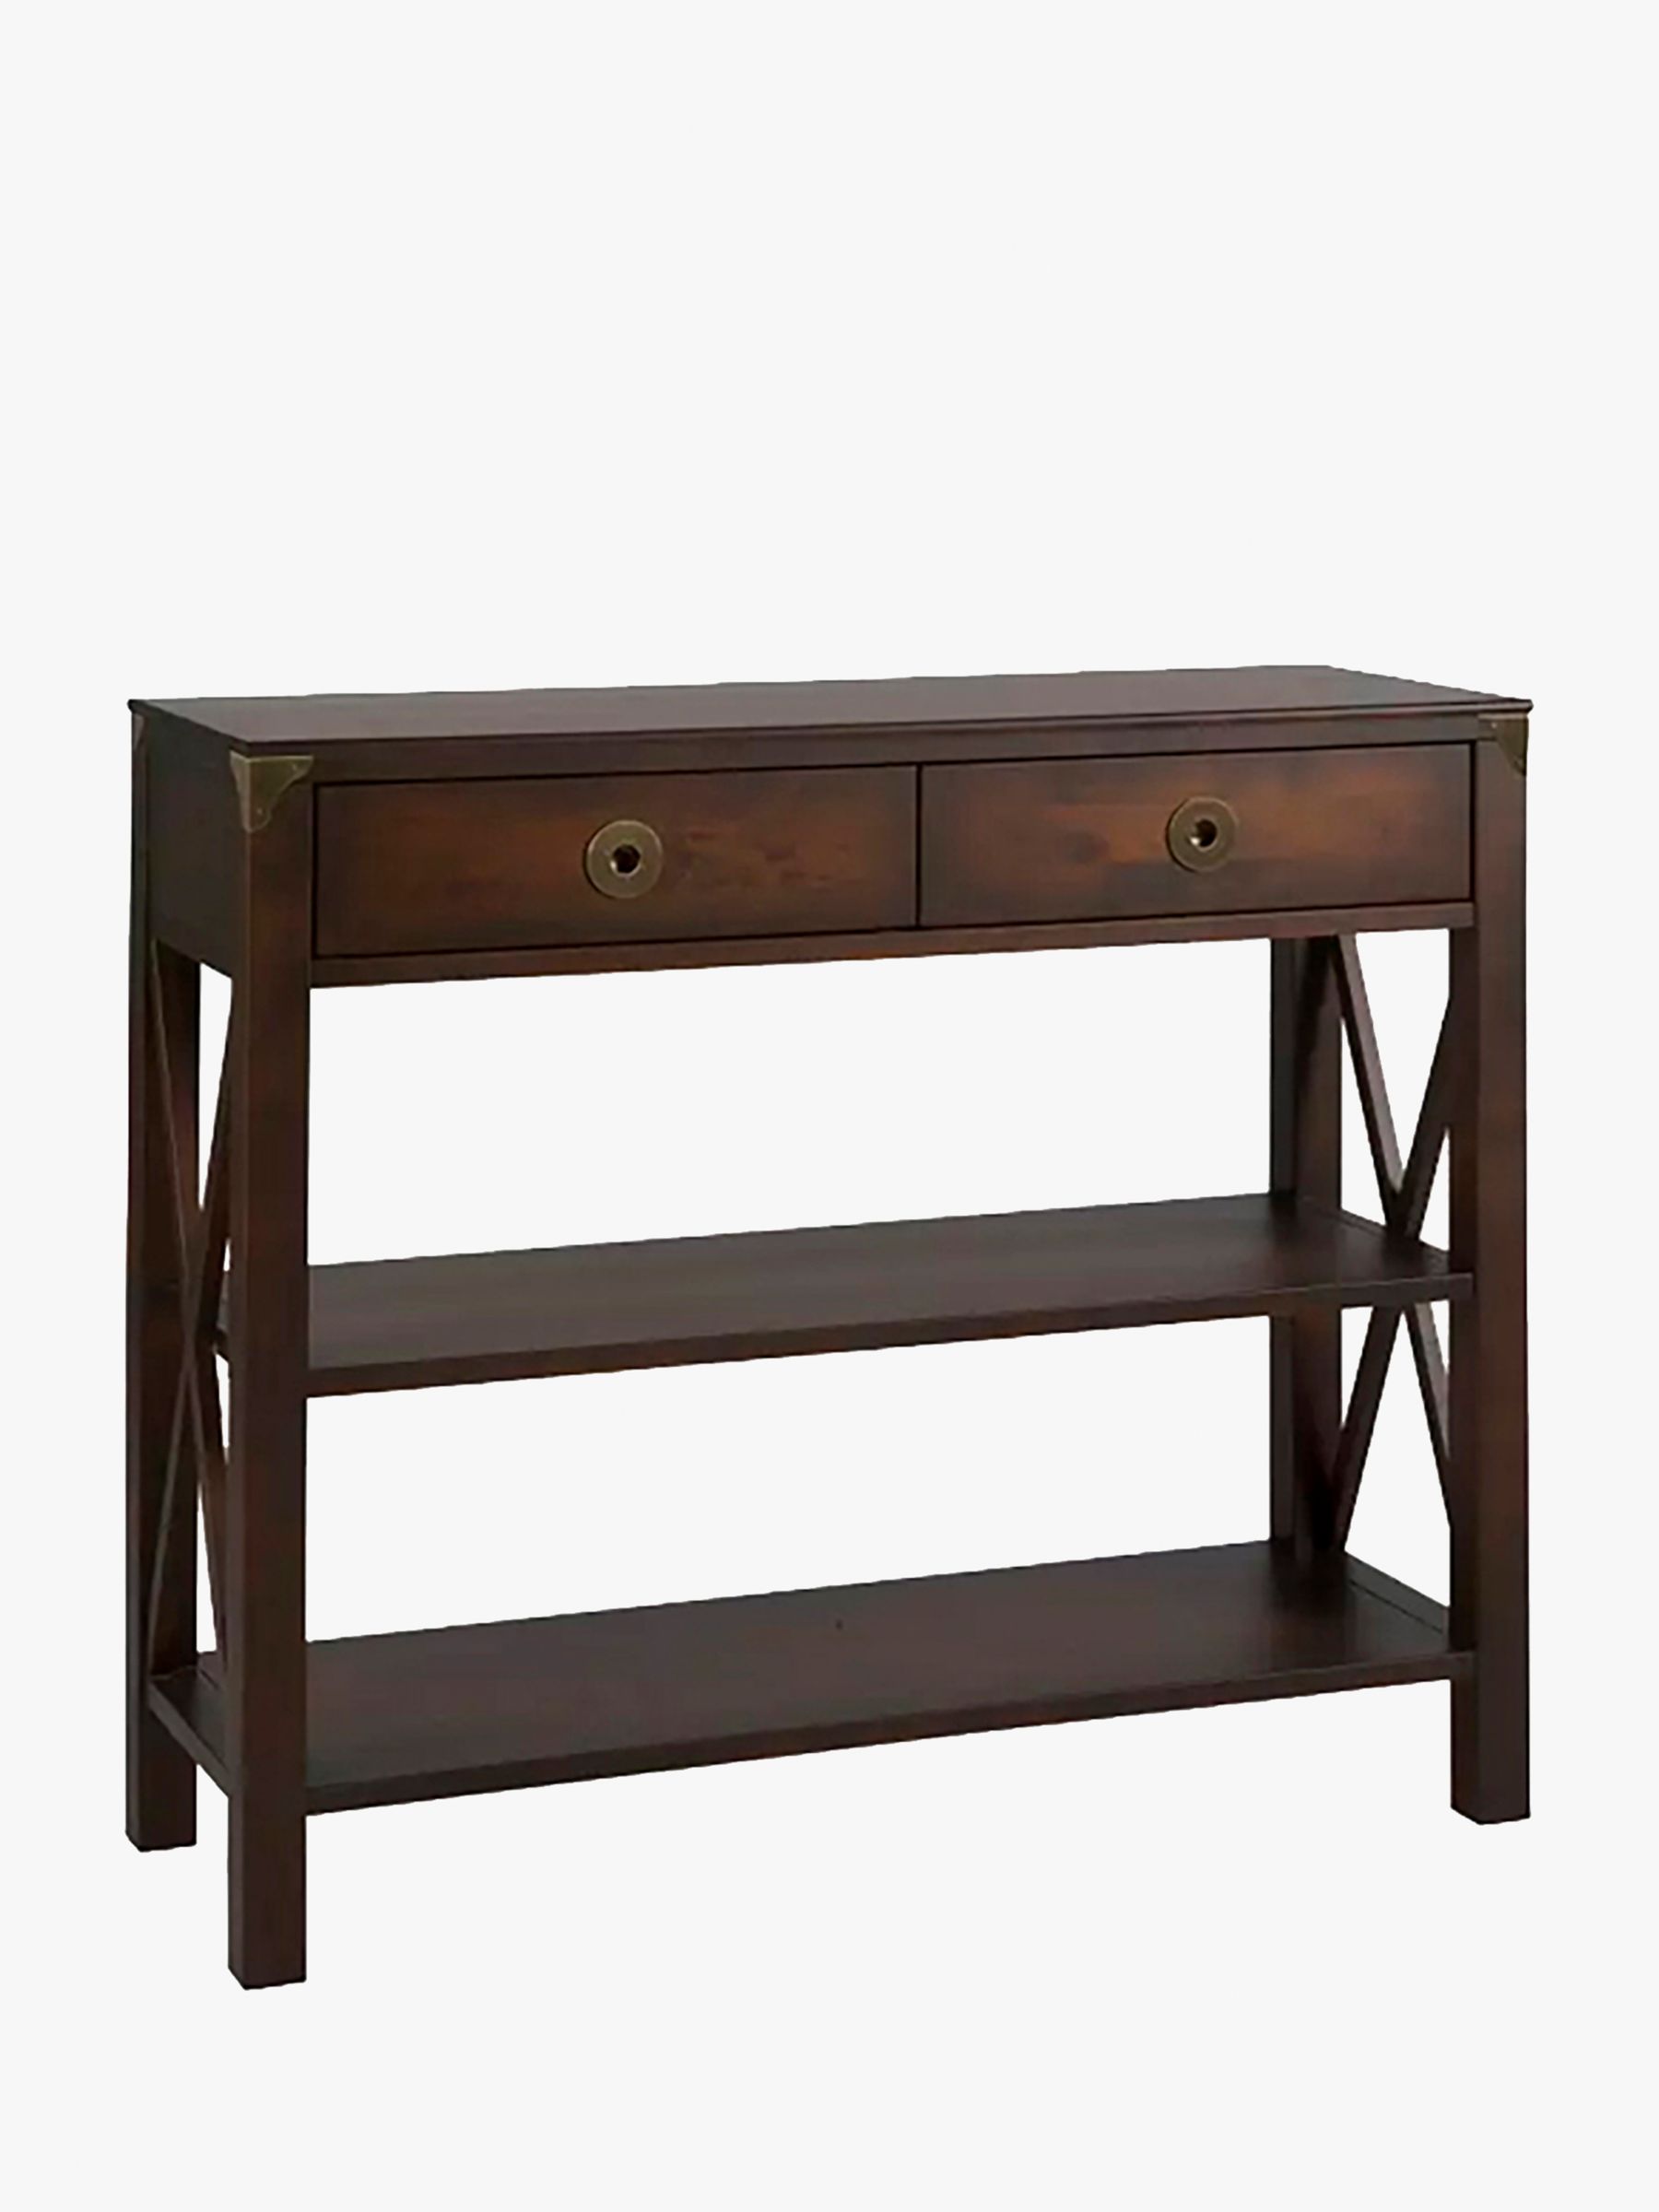 Photo of Laura ashley balmoral console table chestnut brown